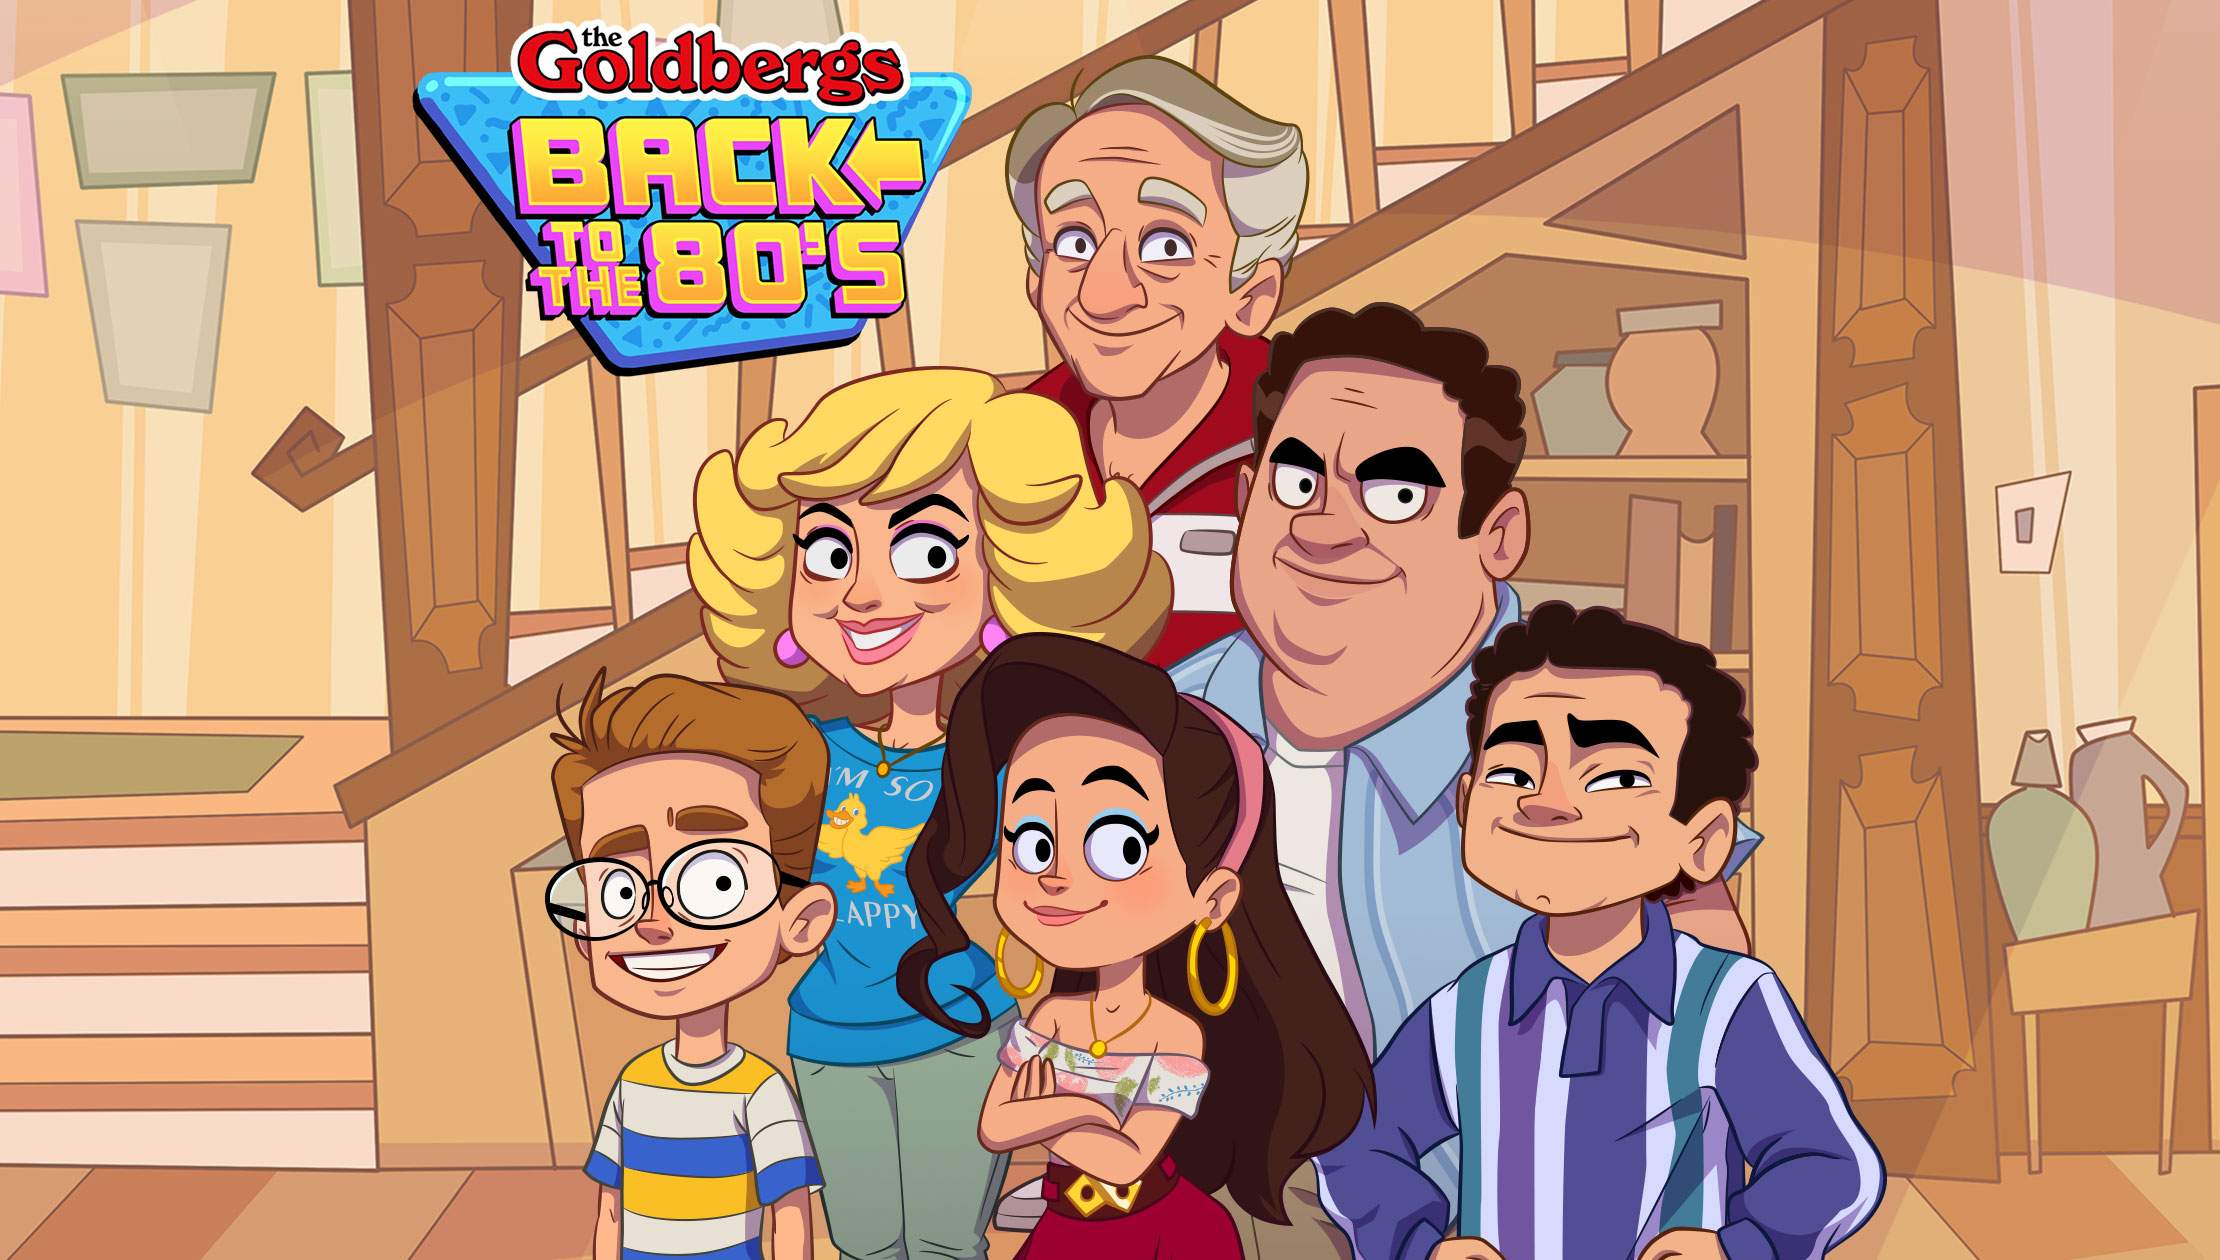 The Goldbergs: Back to the 80s